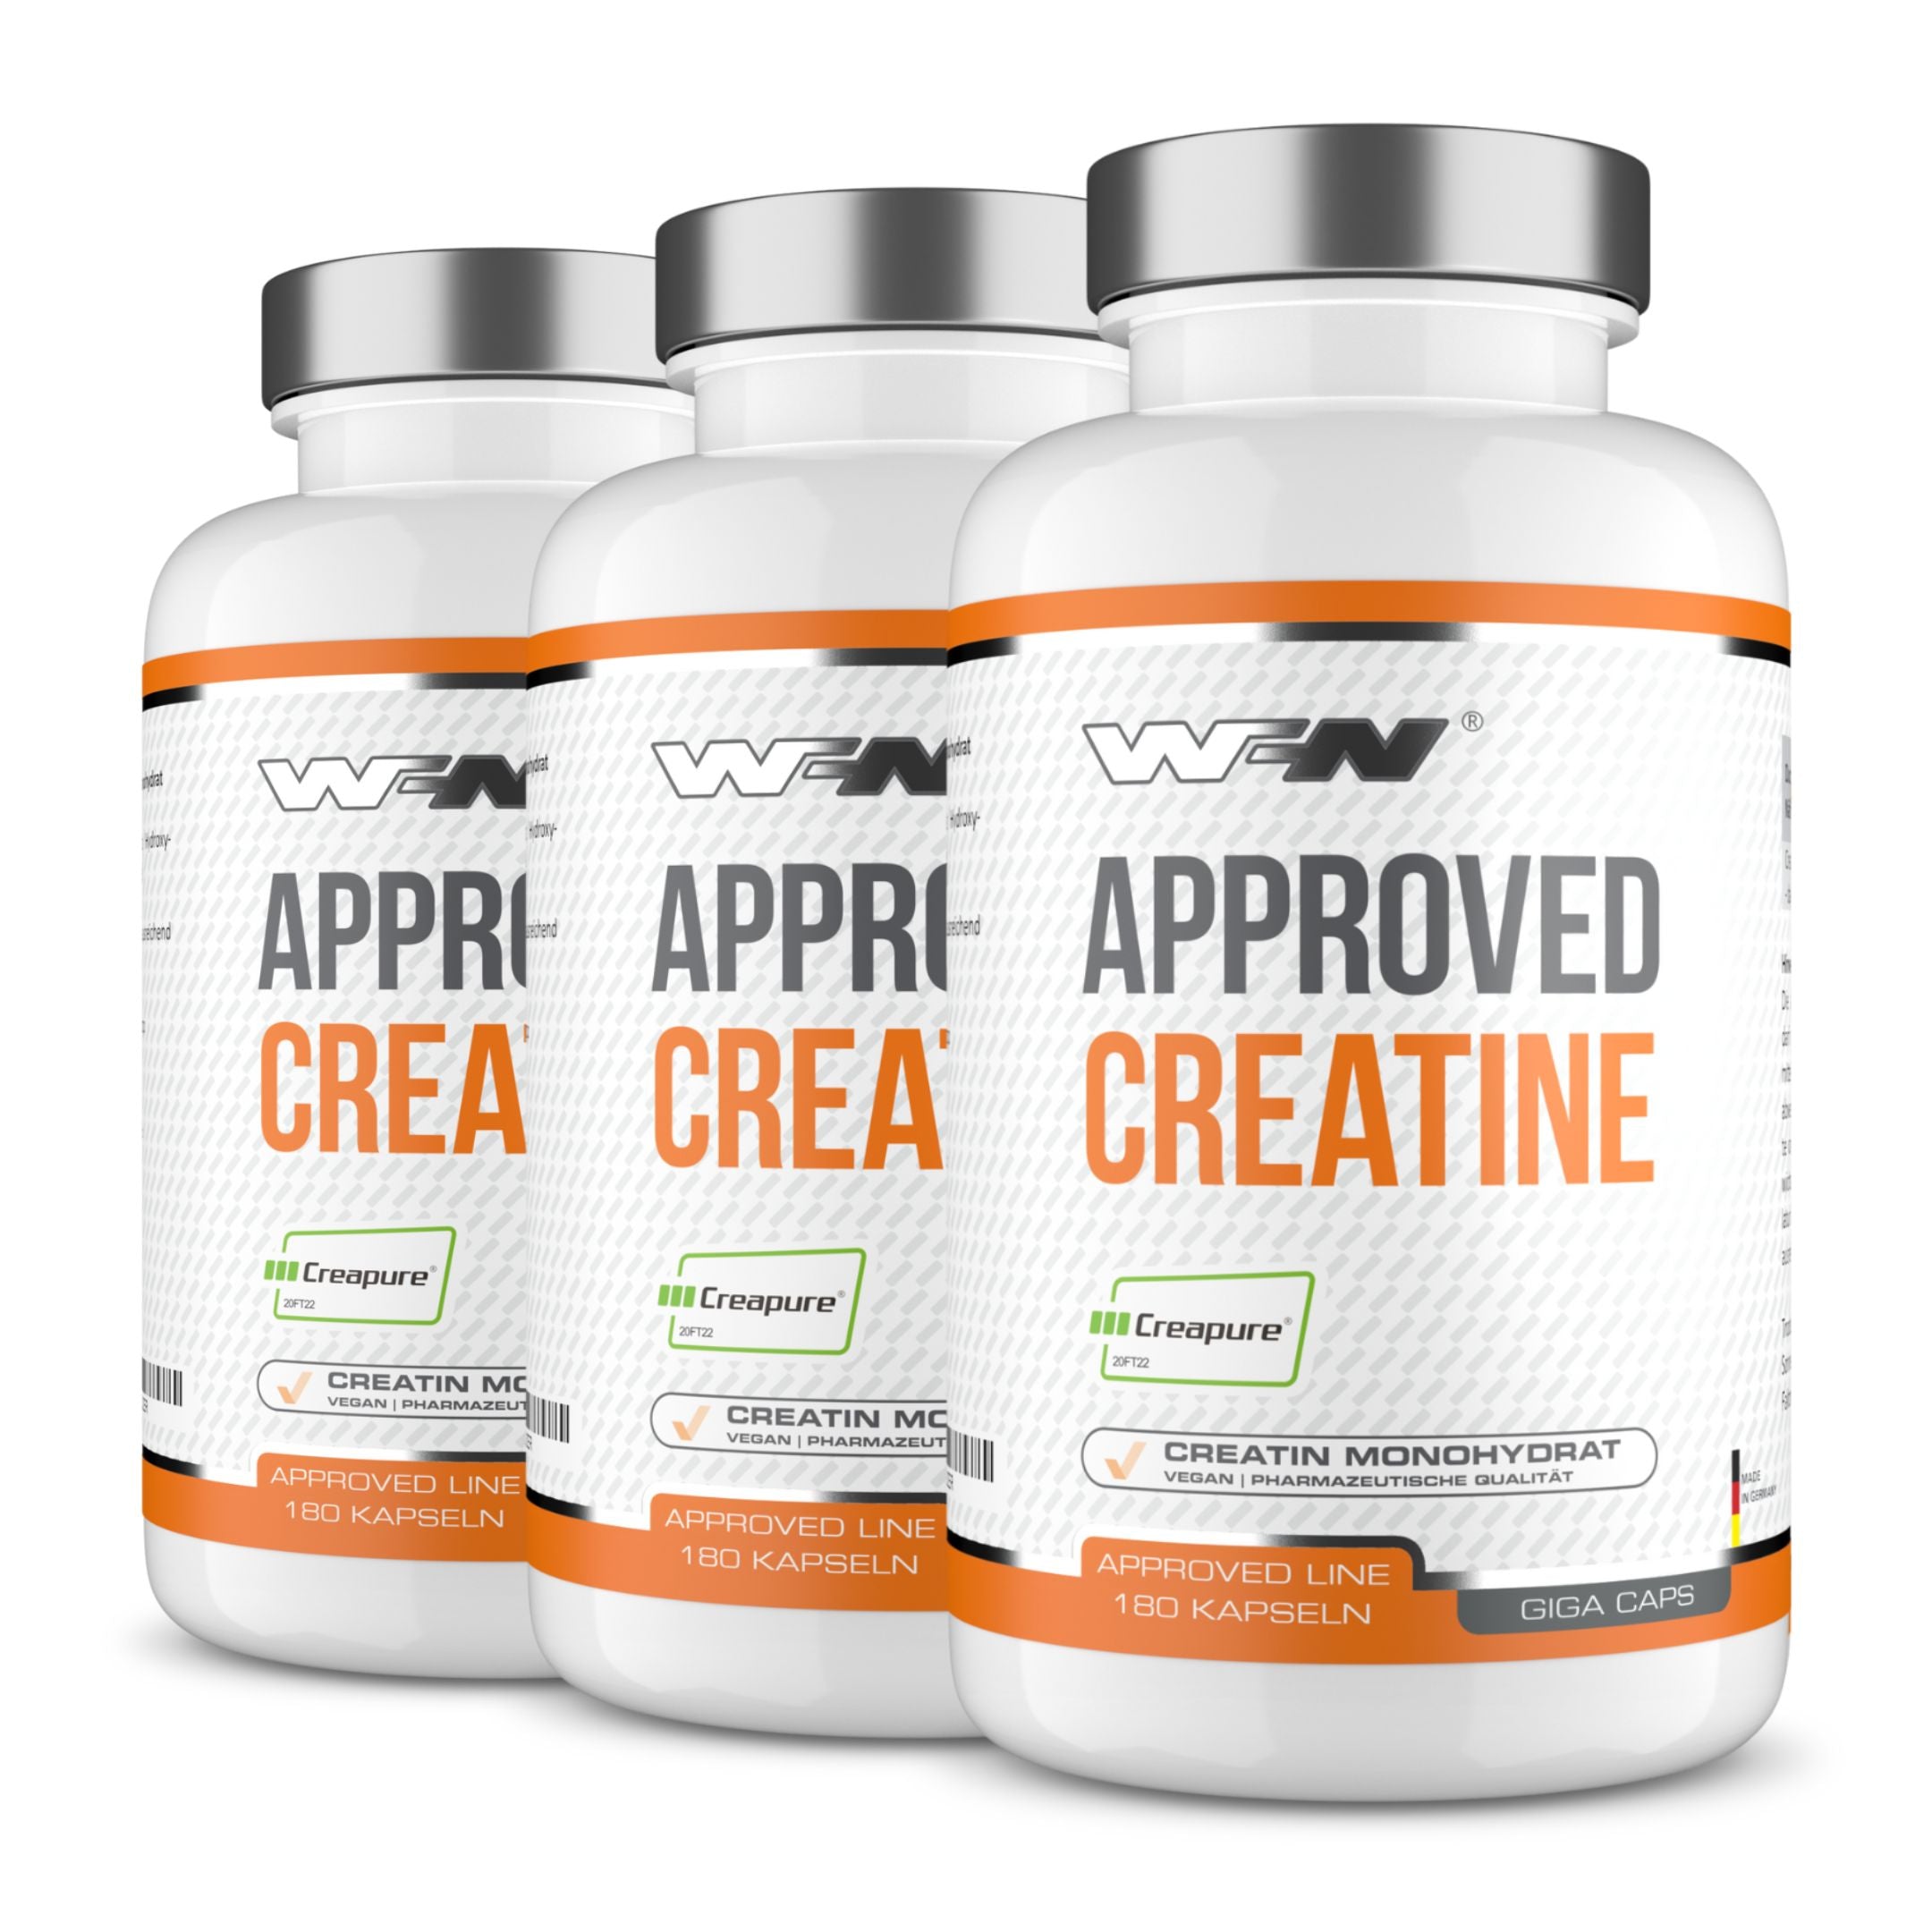 Approved Creatine Caps